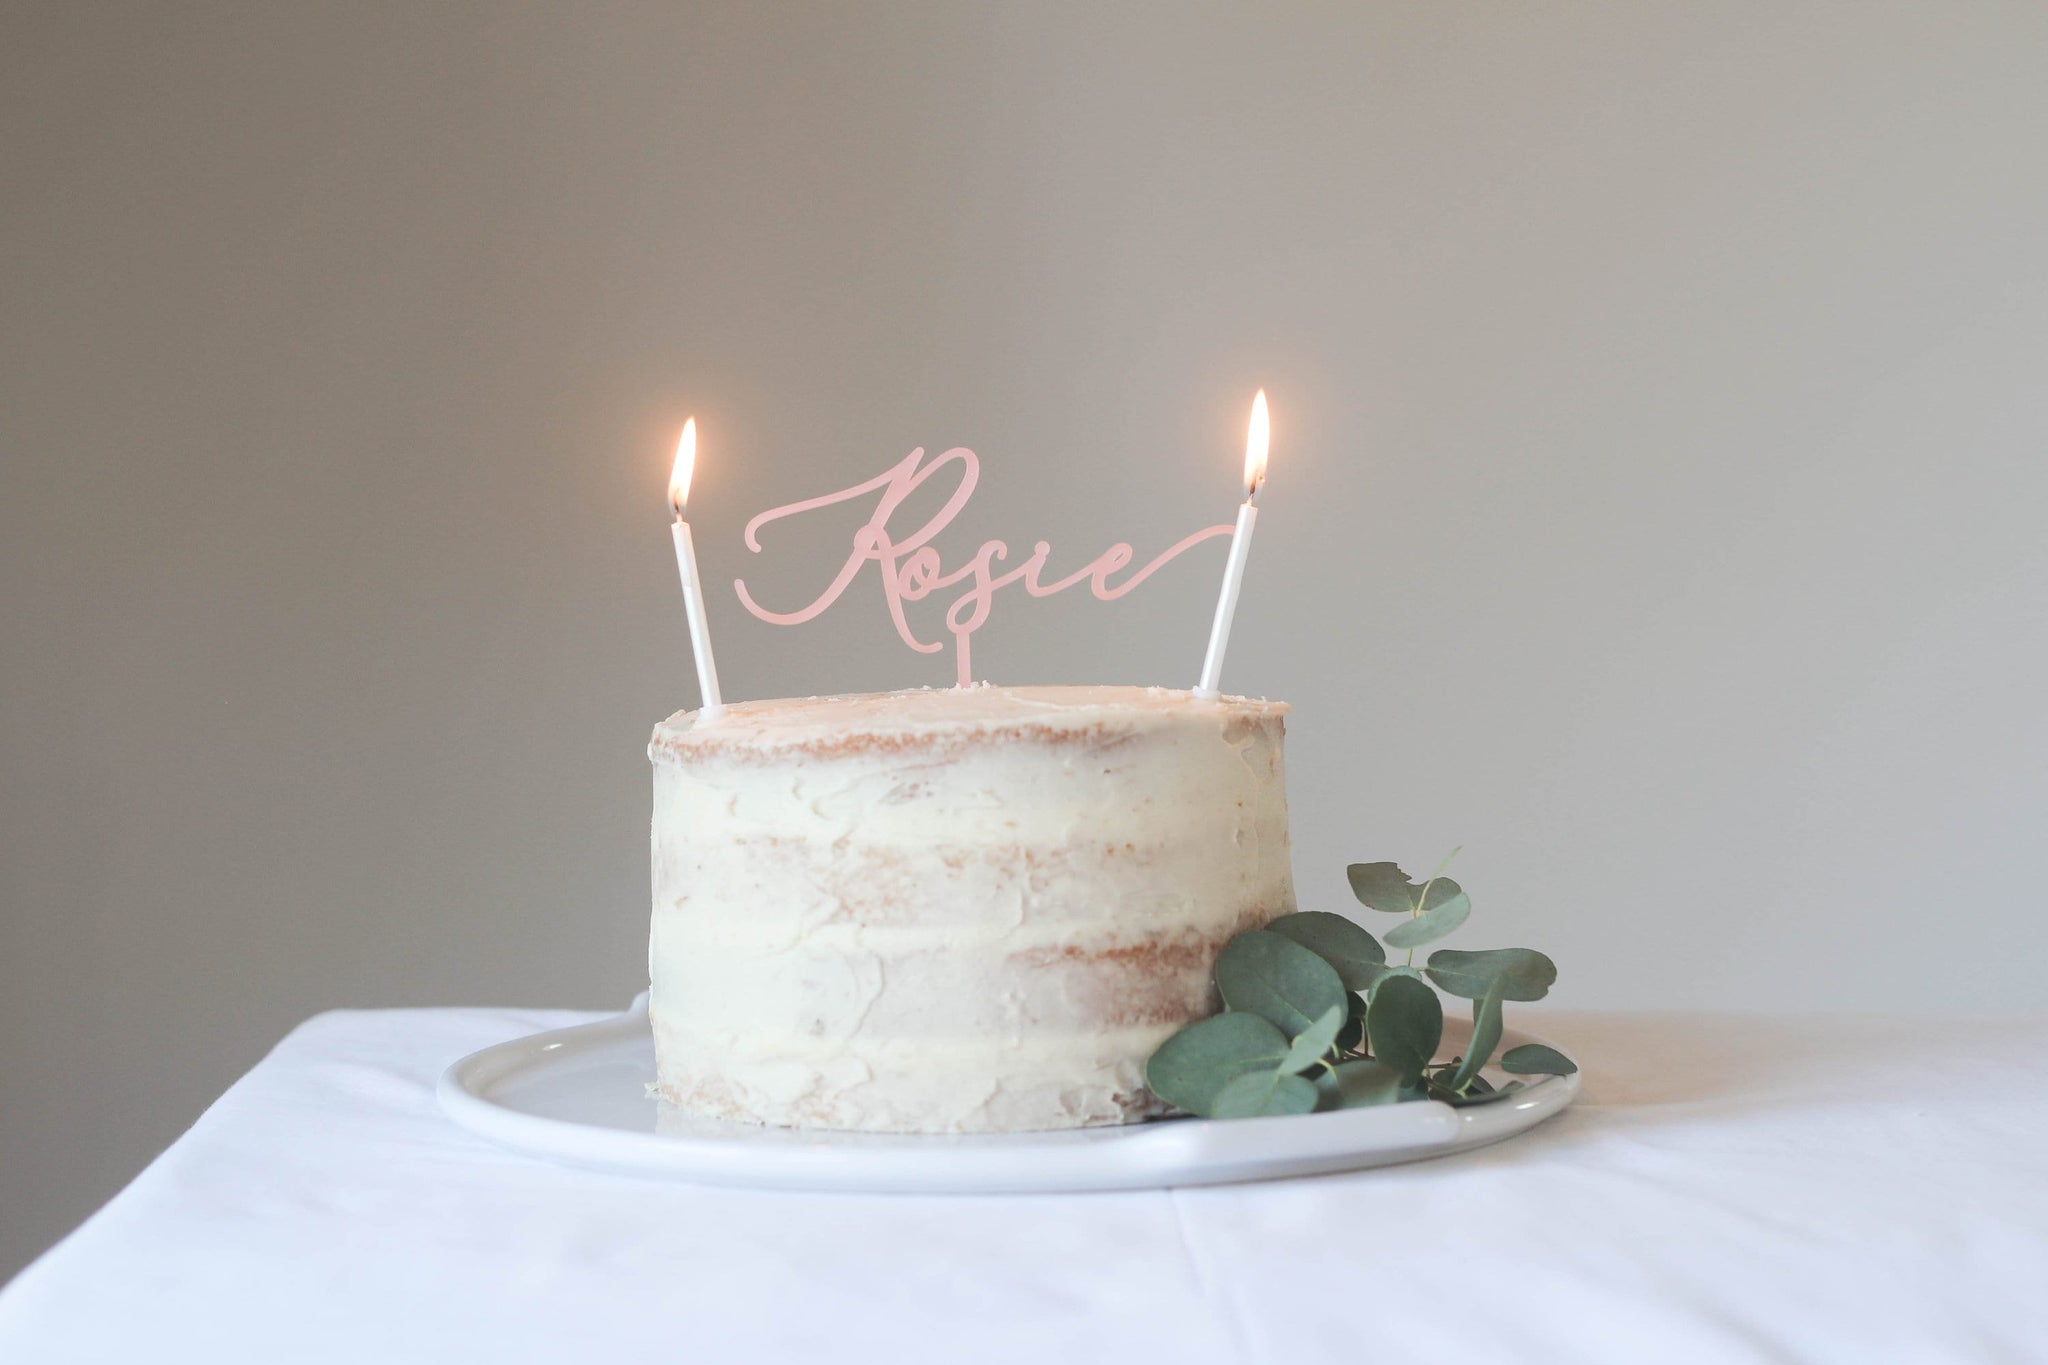 Custom Name Cake Topper Perfect To Finish That Unique Cake For Someones Birthday Or Other Special Celebration